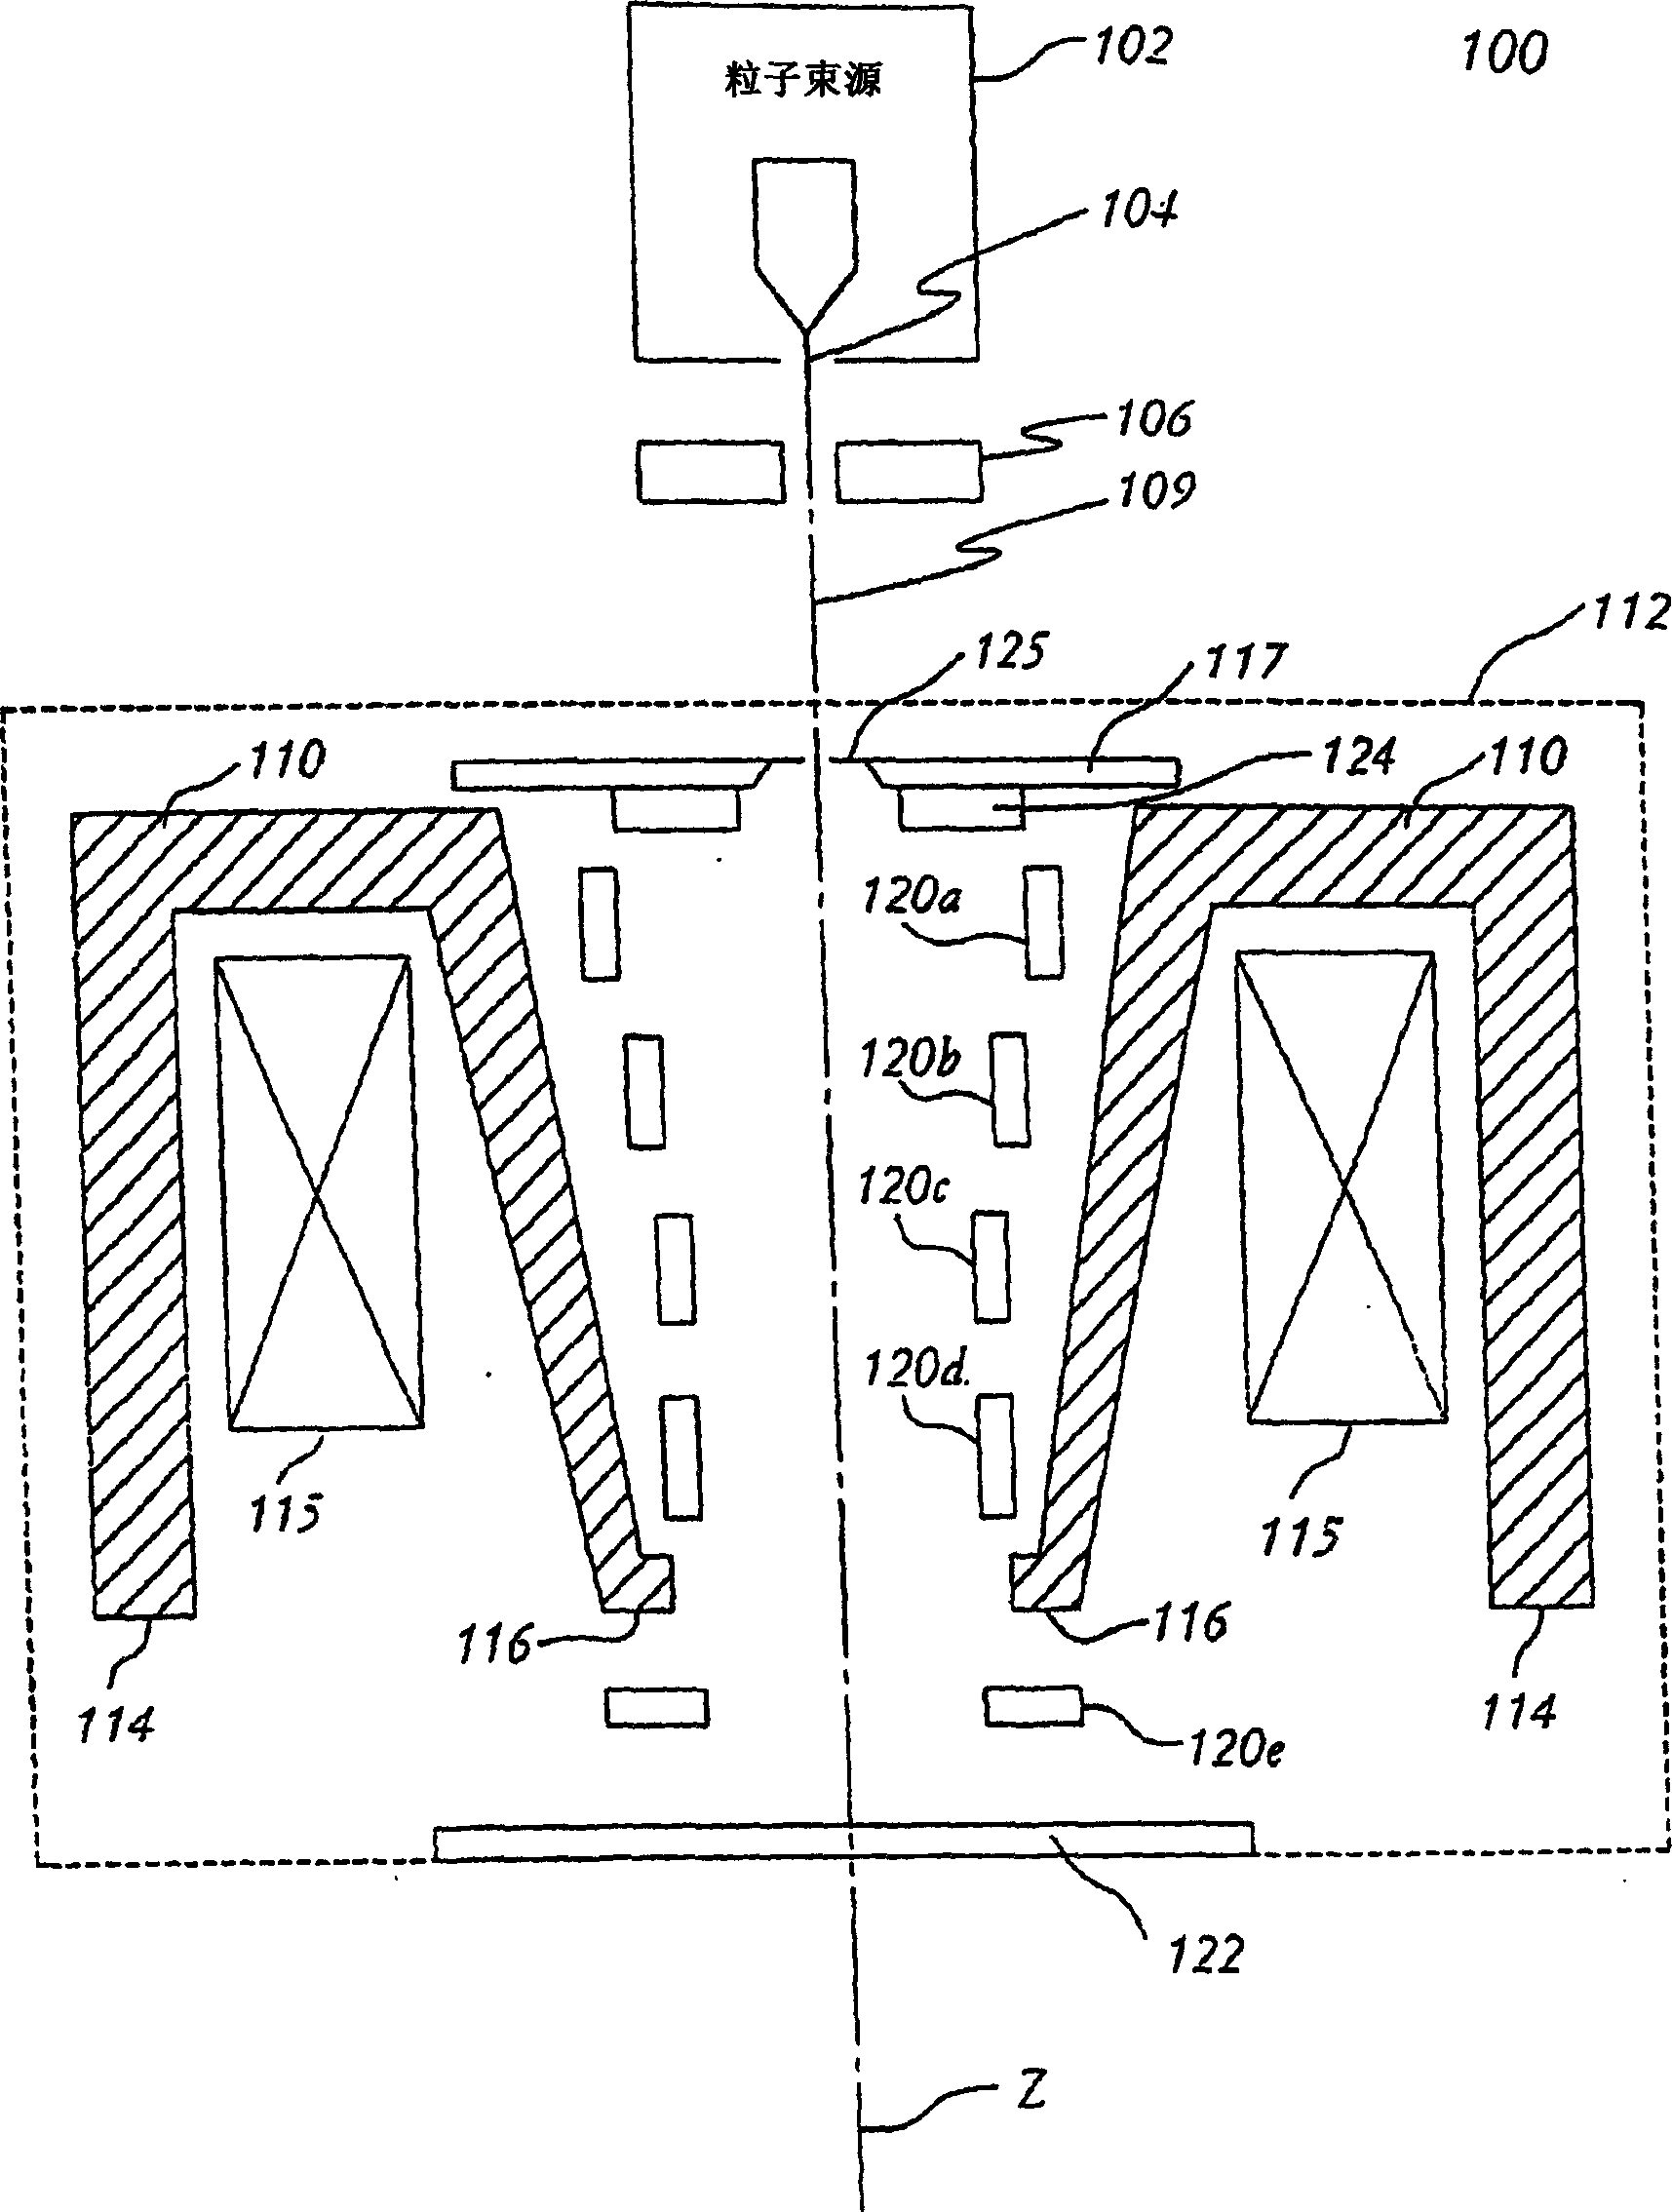 Swinging retarding immersion type lens electron optics focusing, deflection and signal collection system and method